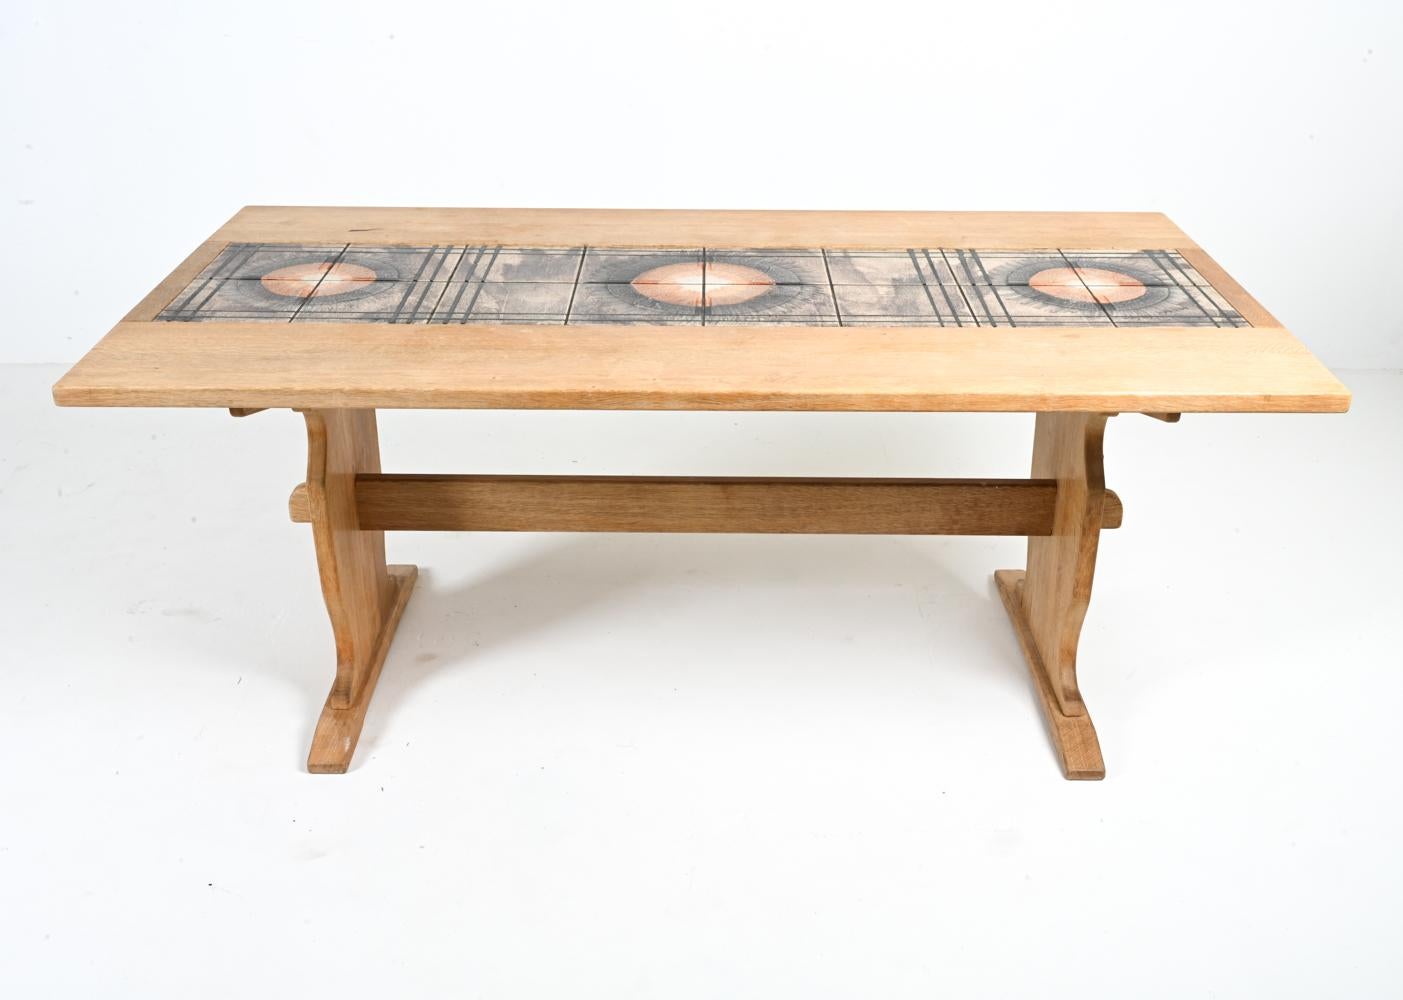 Danish Ox Art Oak & Ceramic Tile Mosaic-Top Dining Table With Leaves, c. 1970's For Sale 7